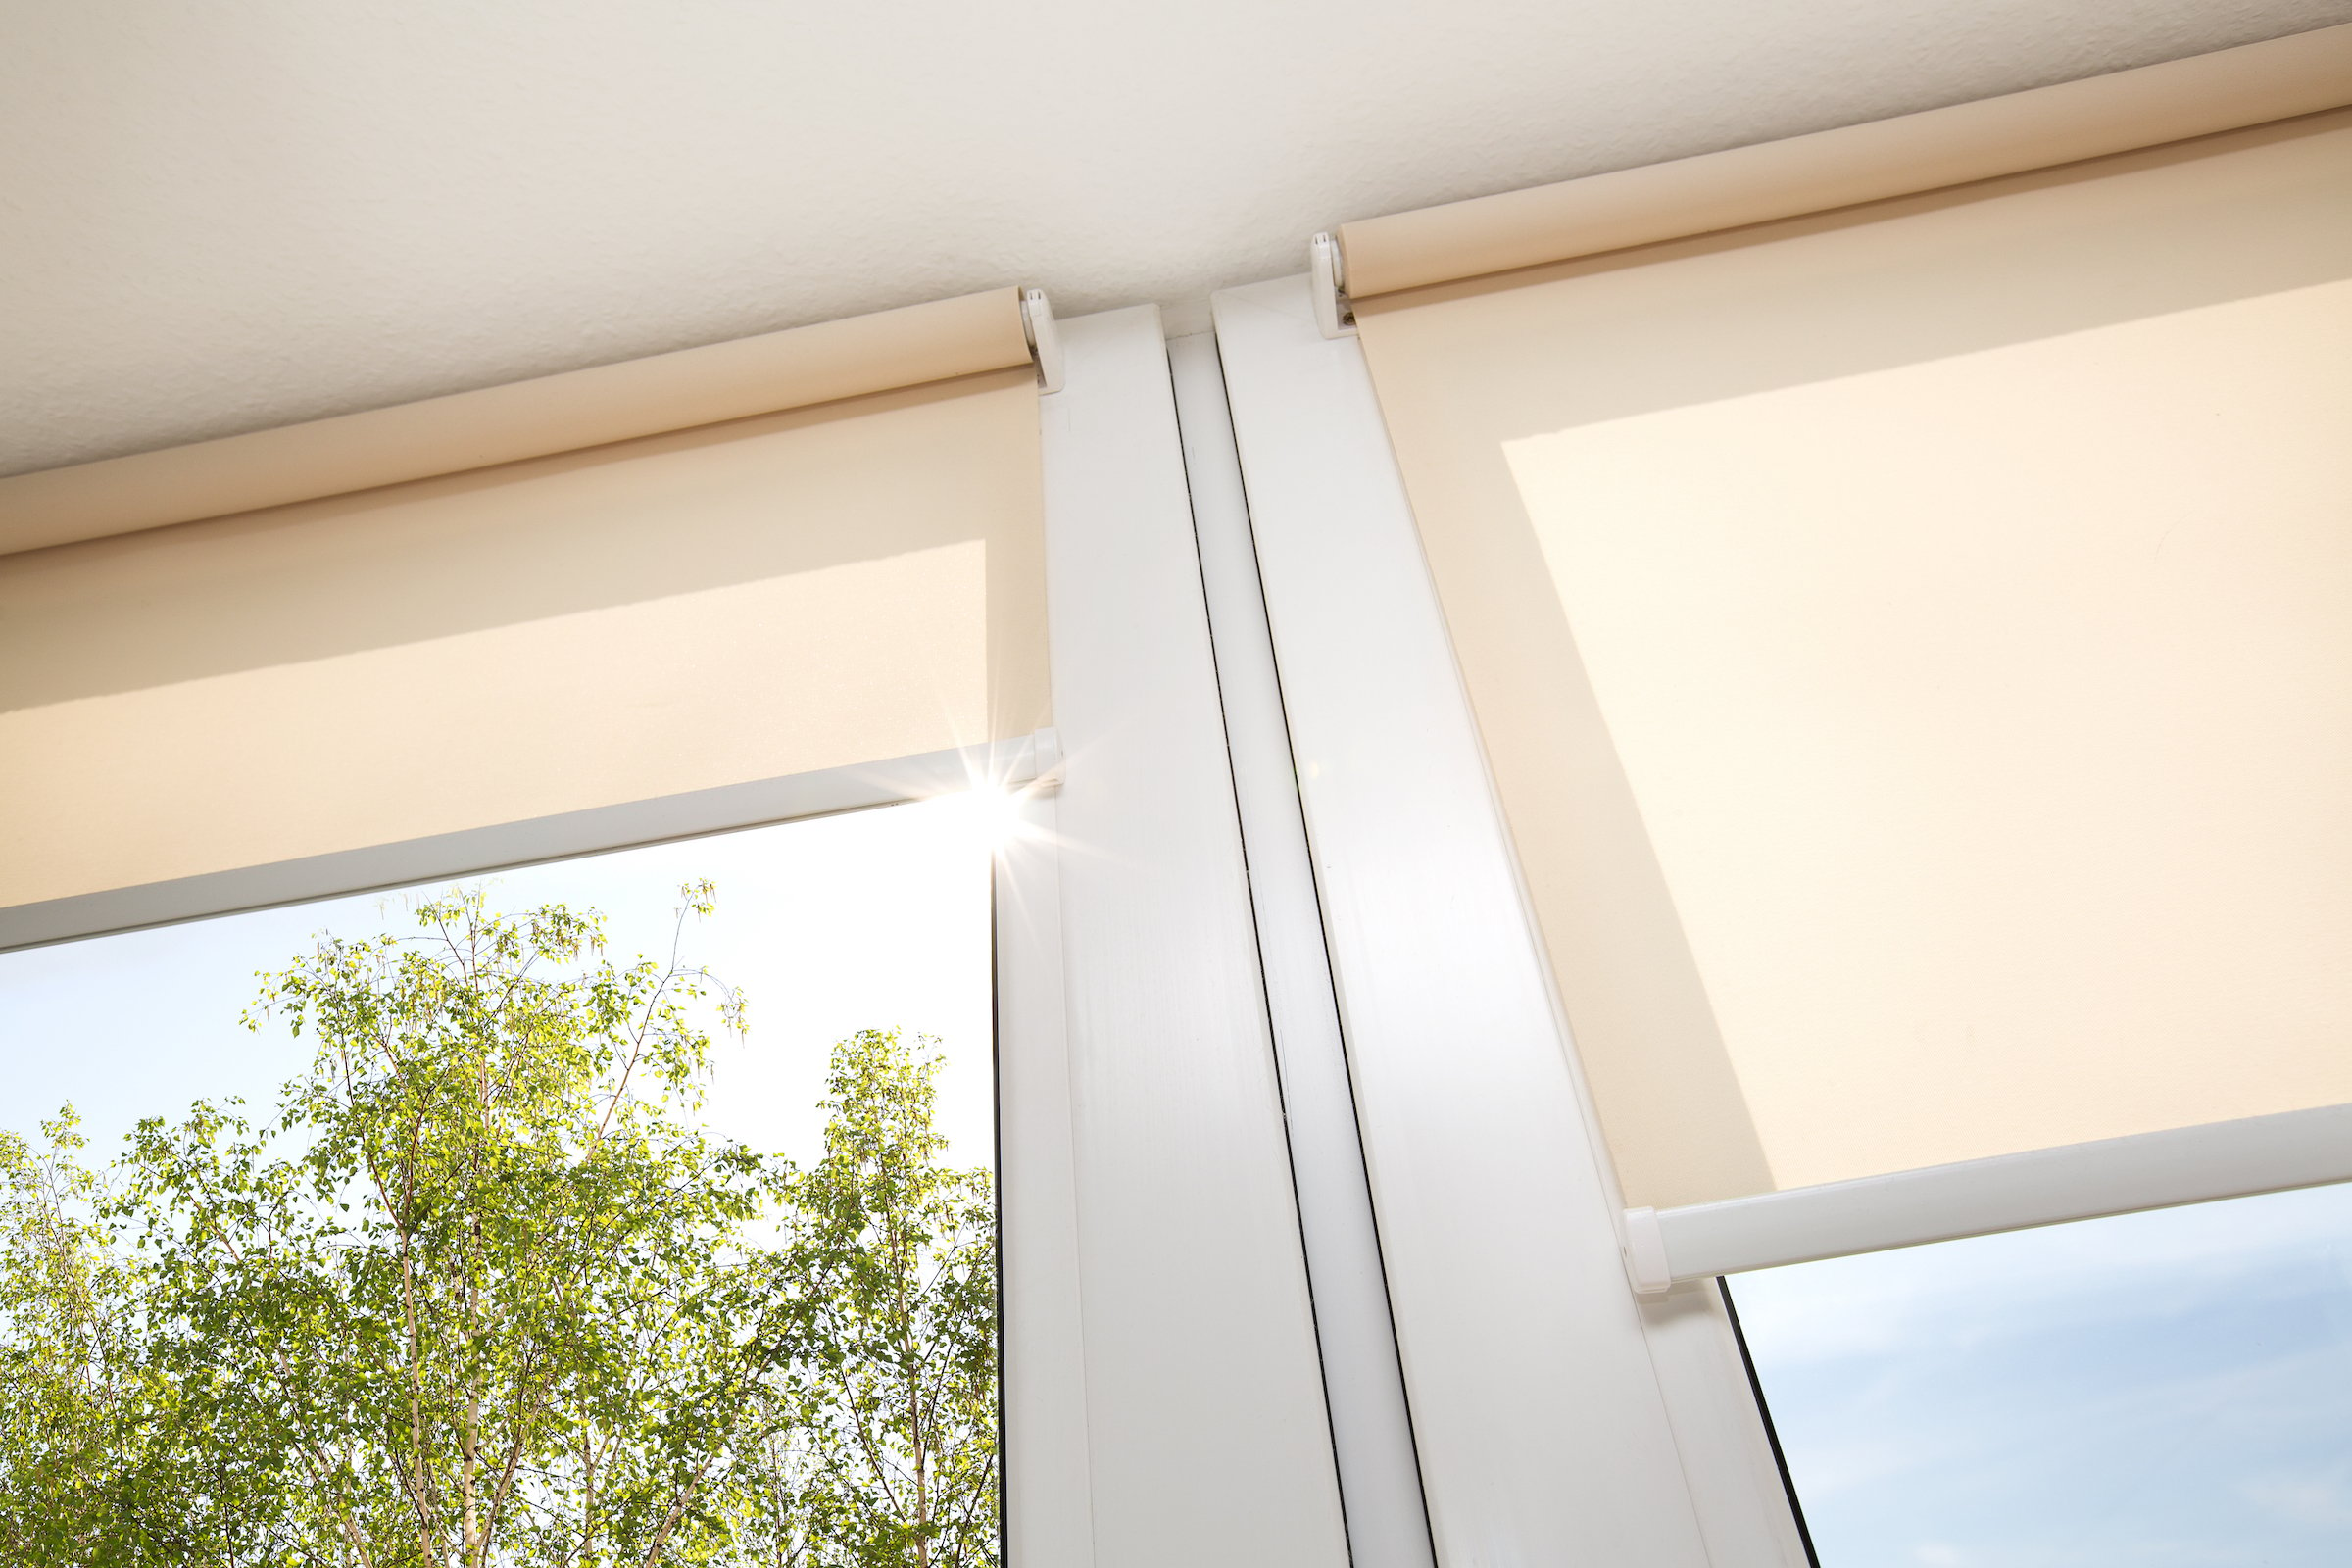 Before you learn how to install blinds, decide on their placement.